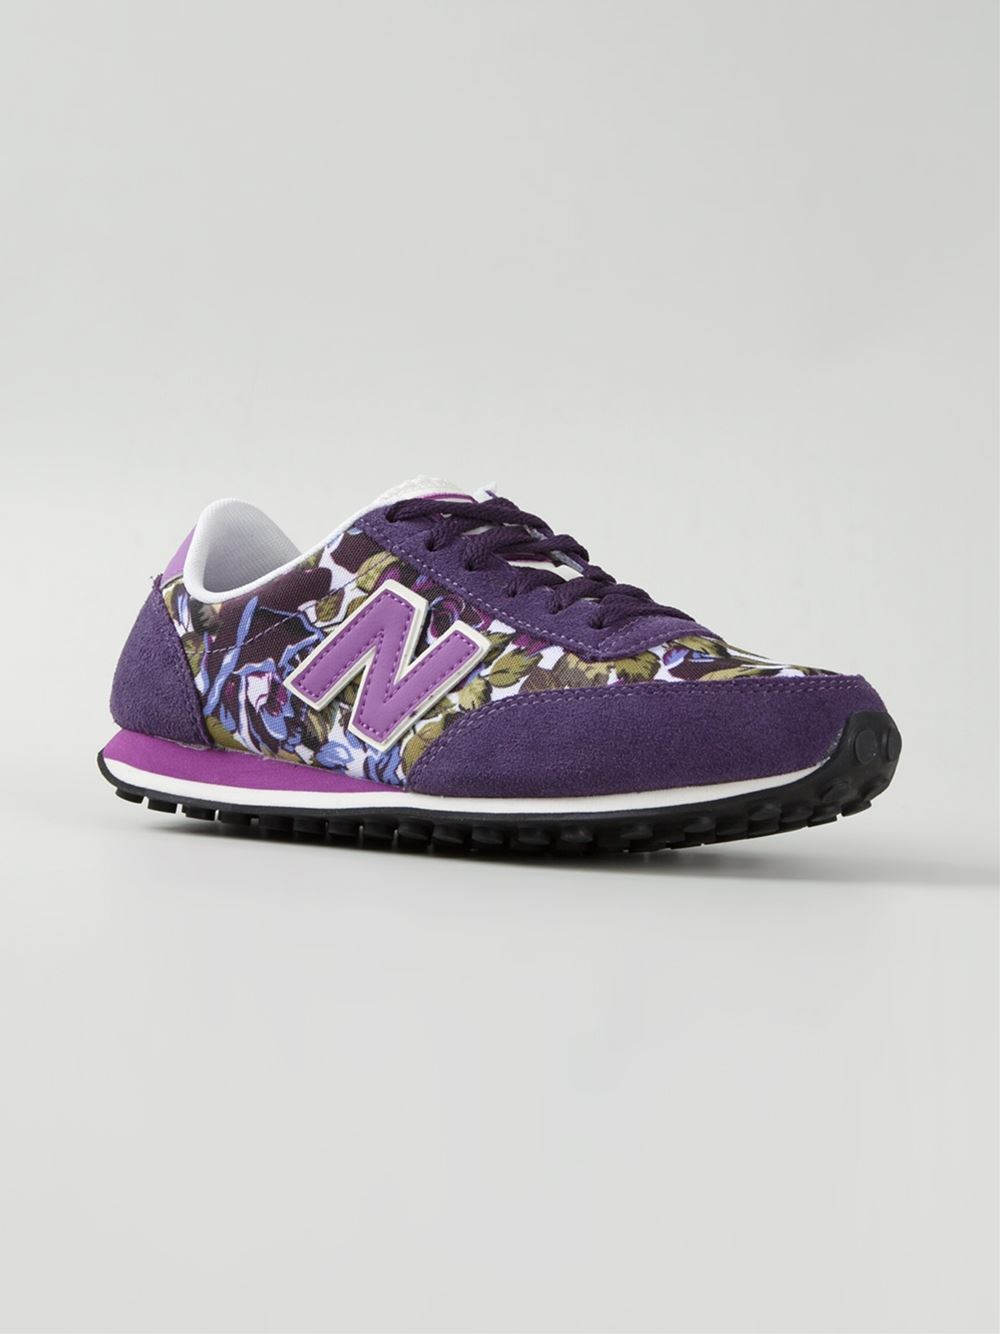 New Balance 410 Floral-Print Sneakers in Purple | Lyst